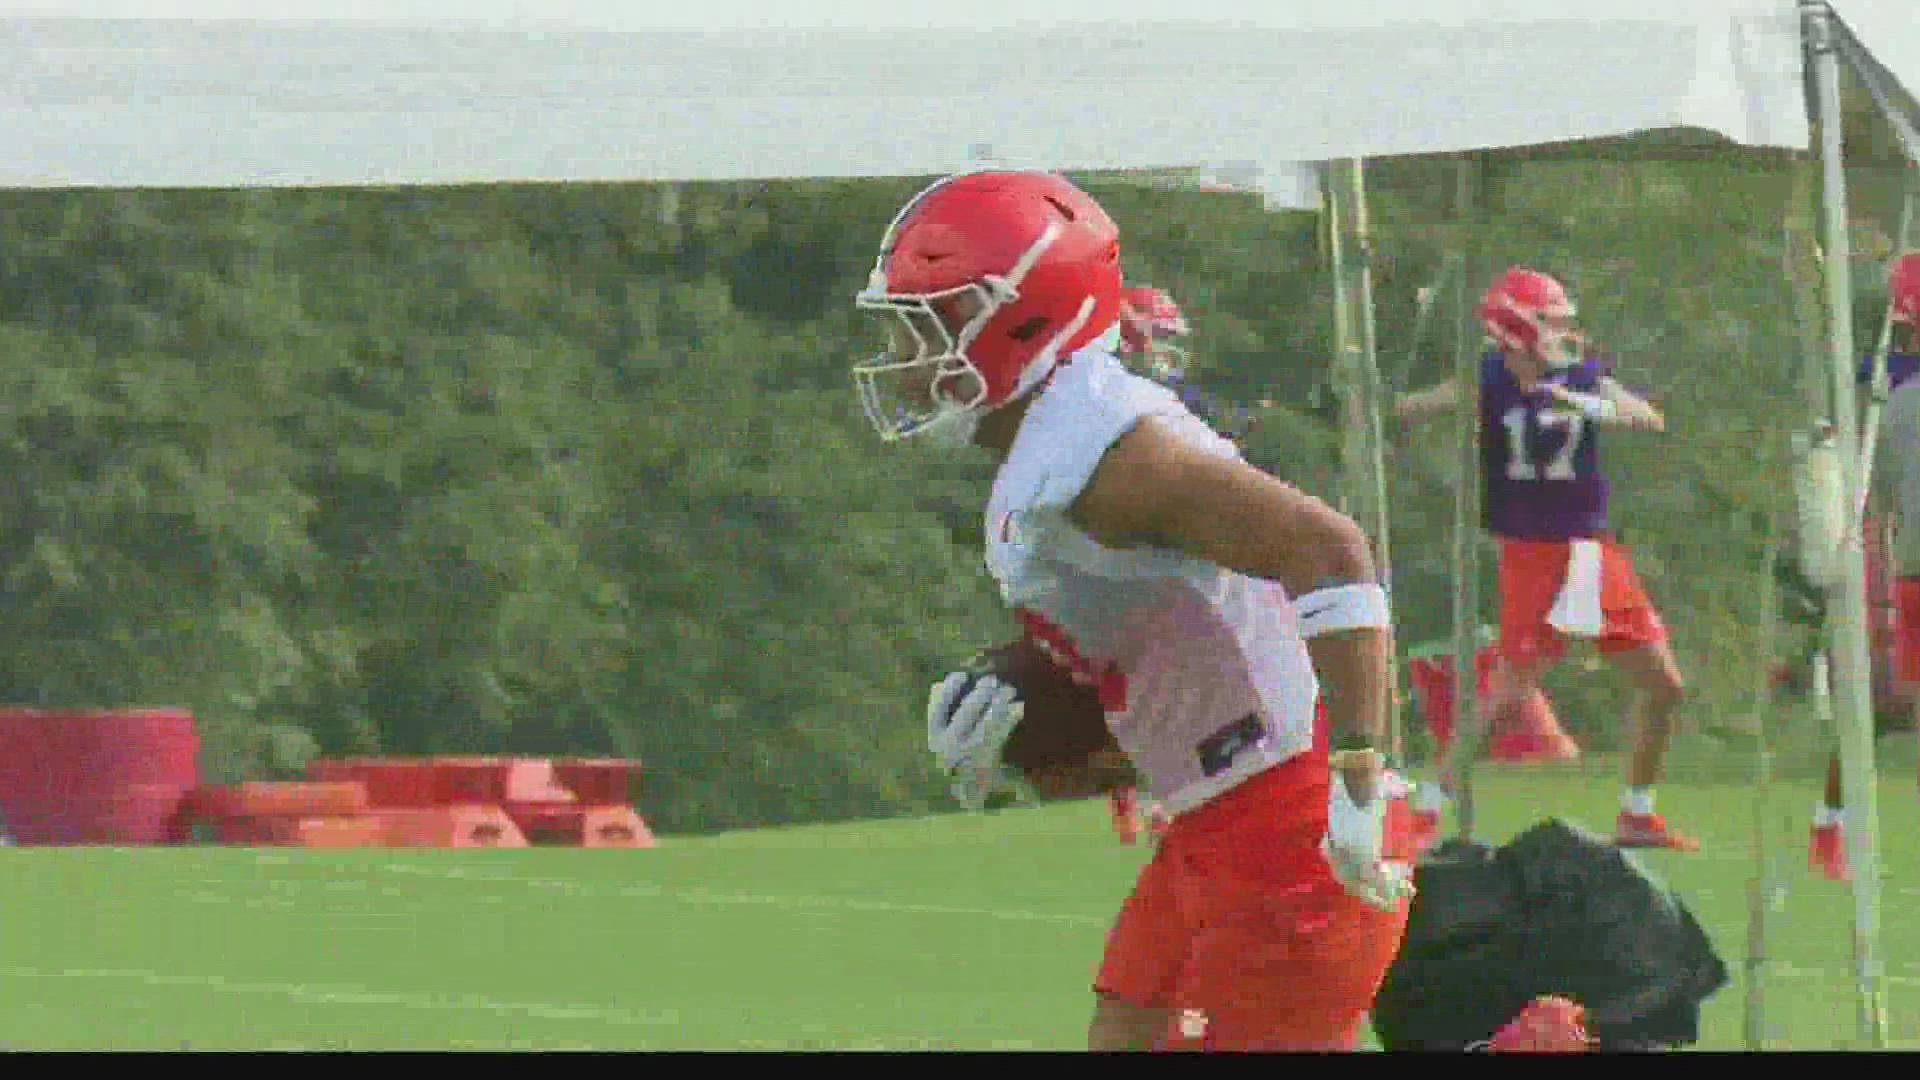 Dutch Fork grad Antonio Williams arrived on the Clemson campus in time for summer workouts. On Friday, he took part in his first official practice with the Tigers.